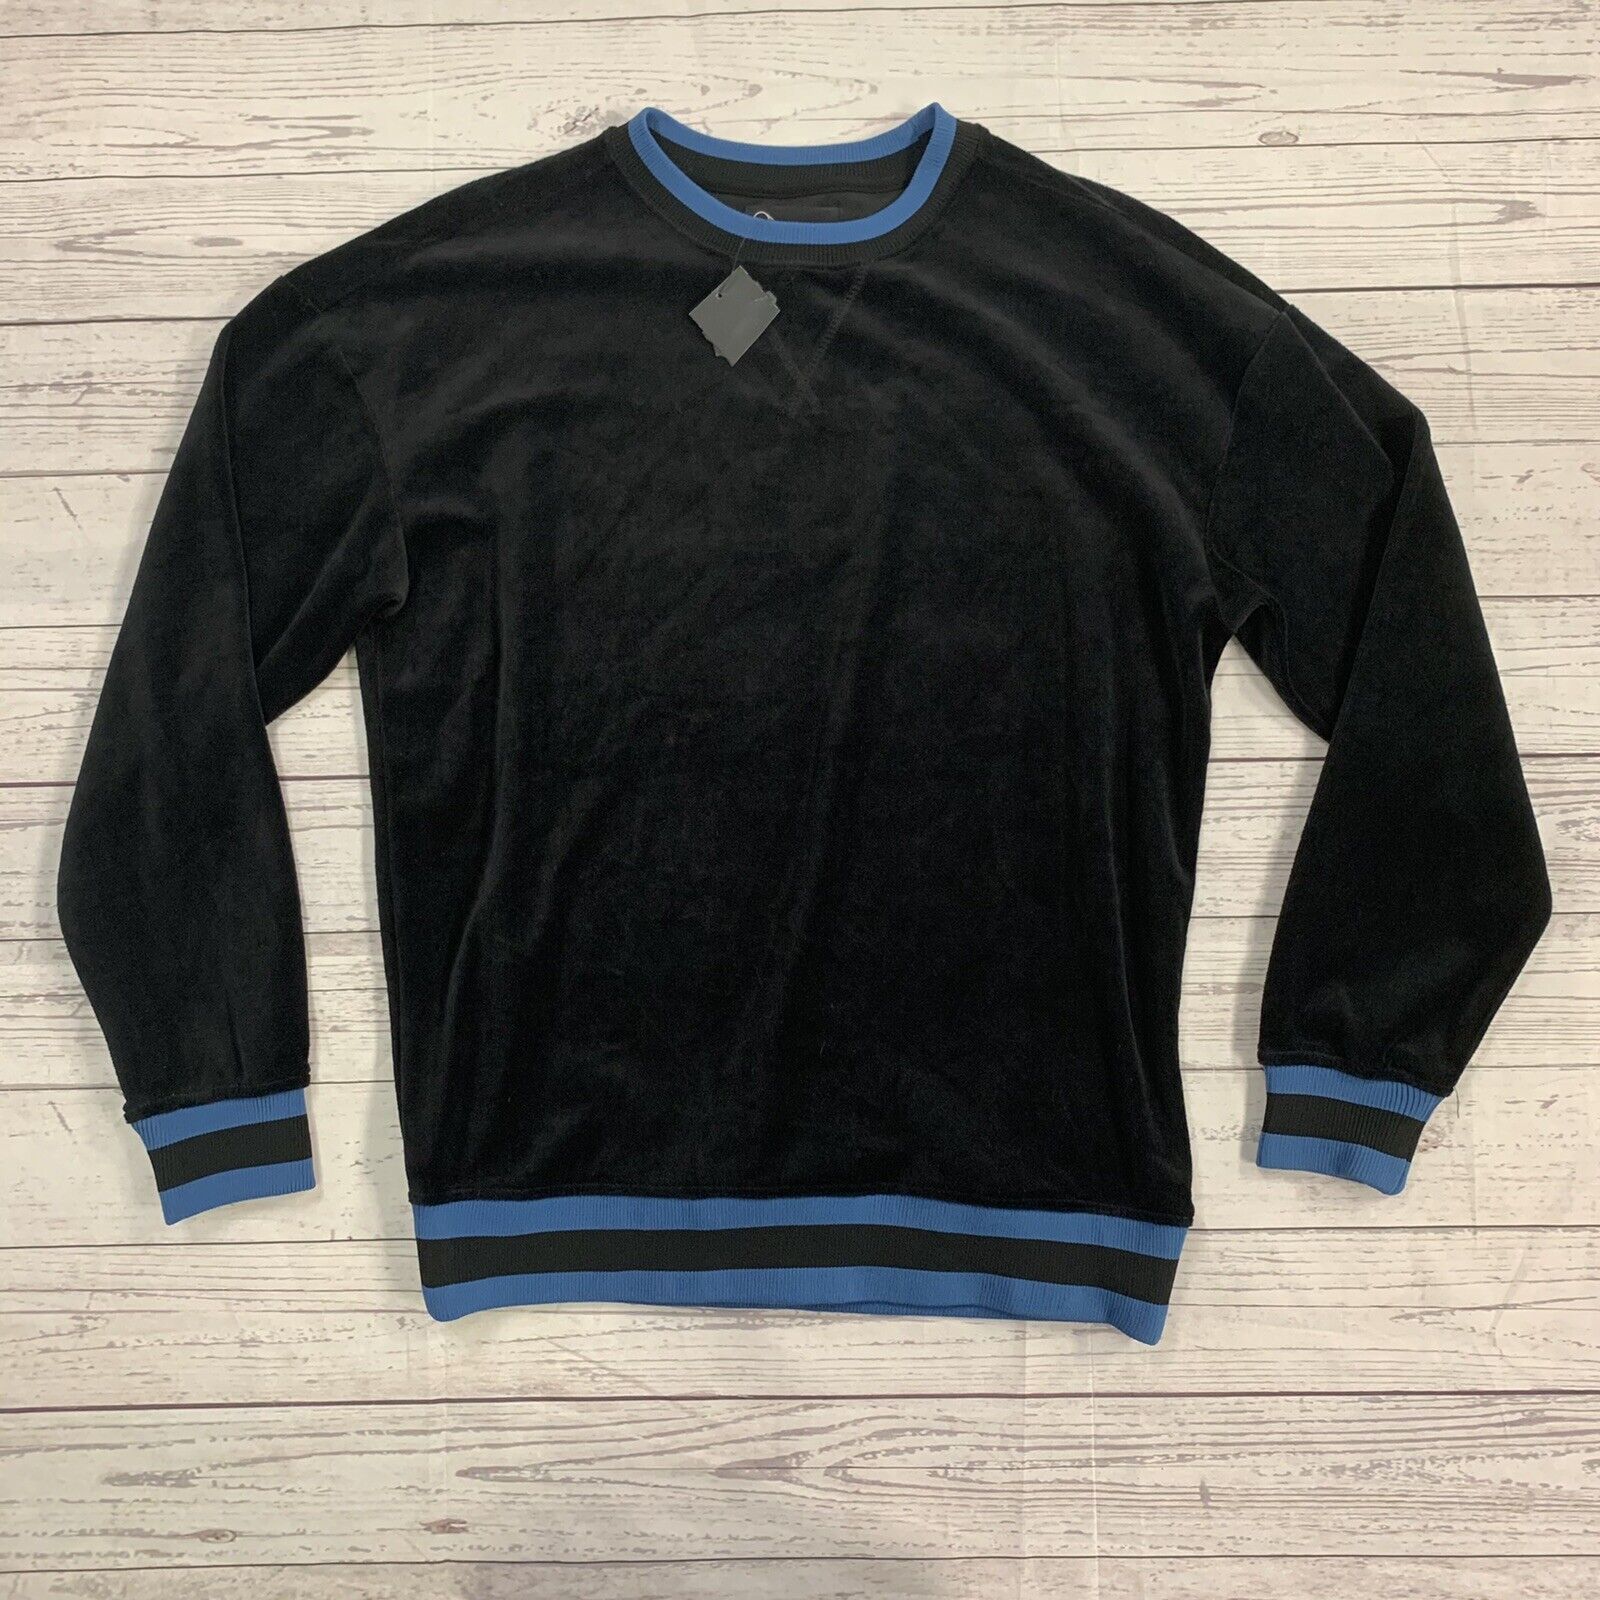 Mens Original Use Black And Blue Sweater Size Small